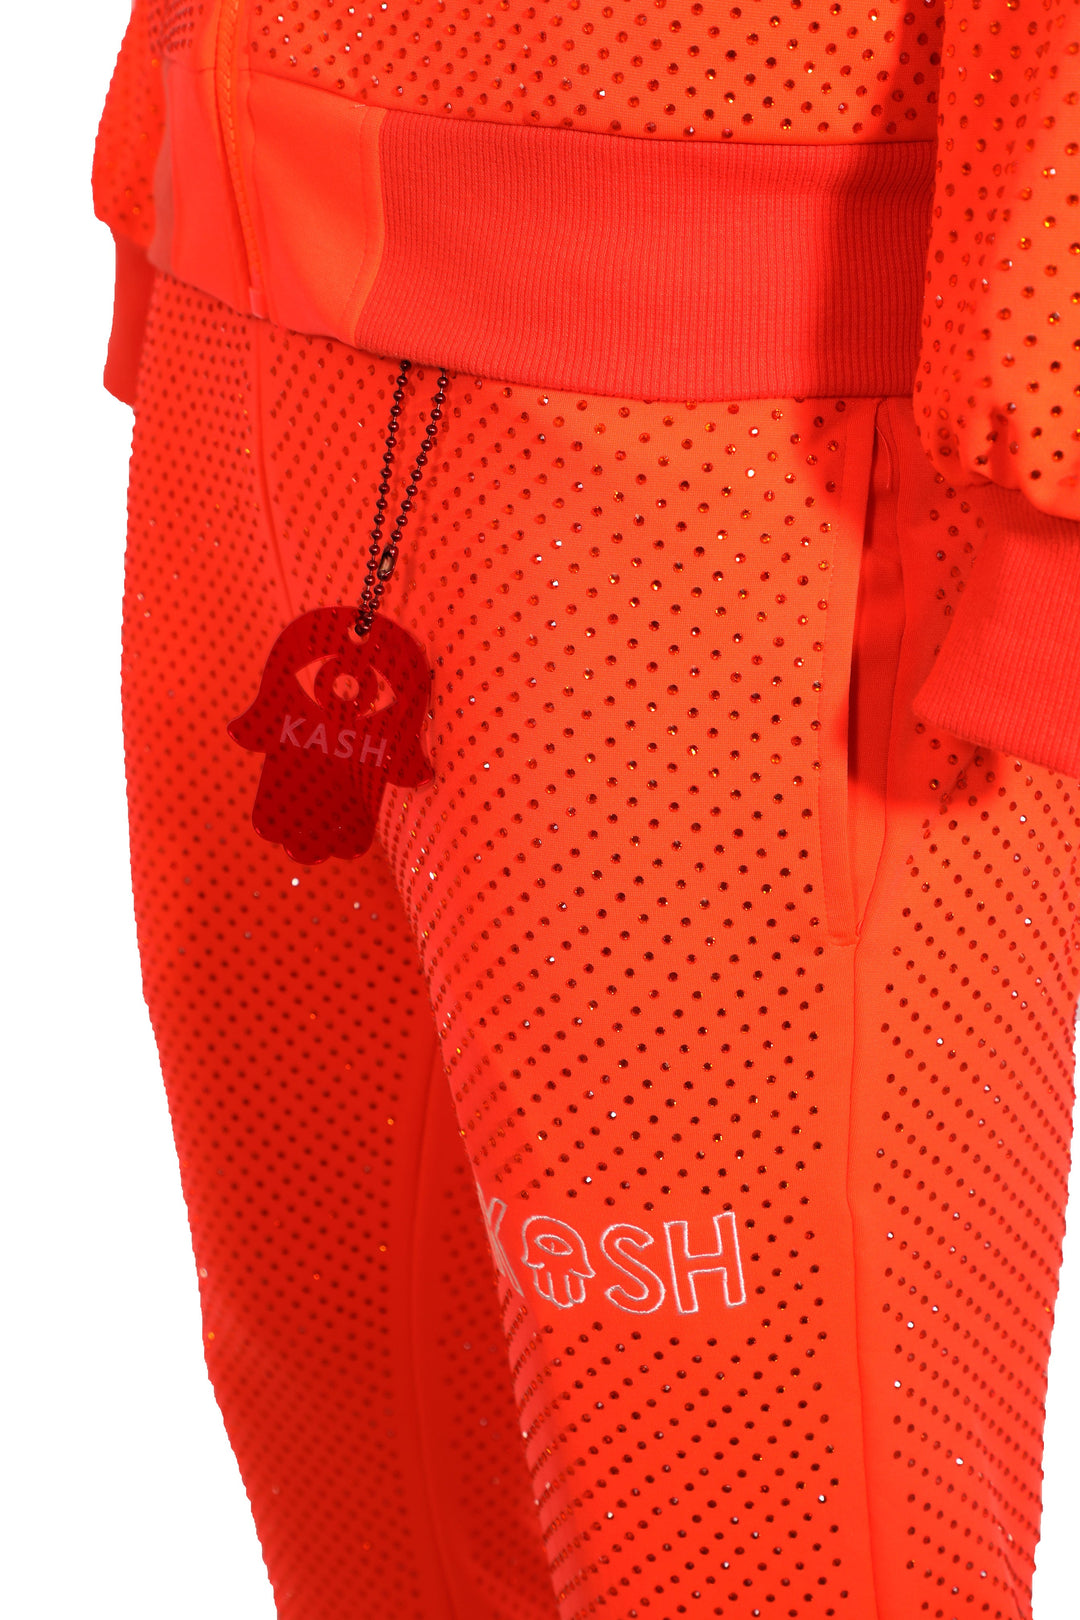 Kash All over diamond track jacket Zip closure Color: Orange 100% Polyester Wrinkle Free Material Fits true to size